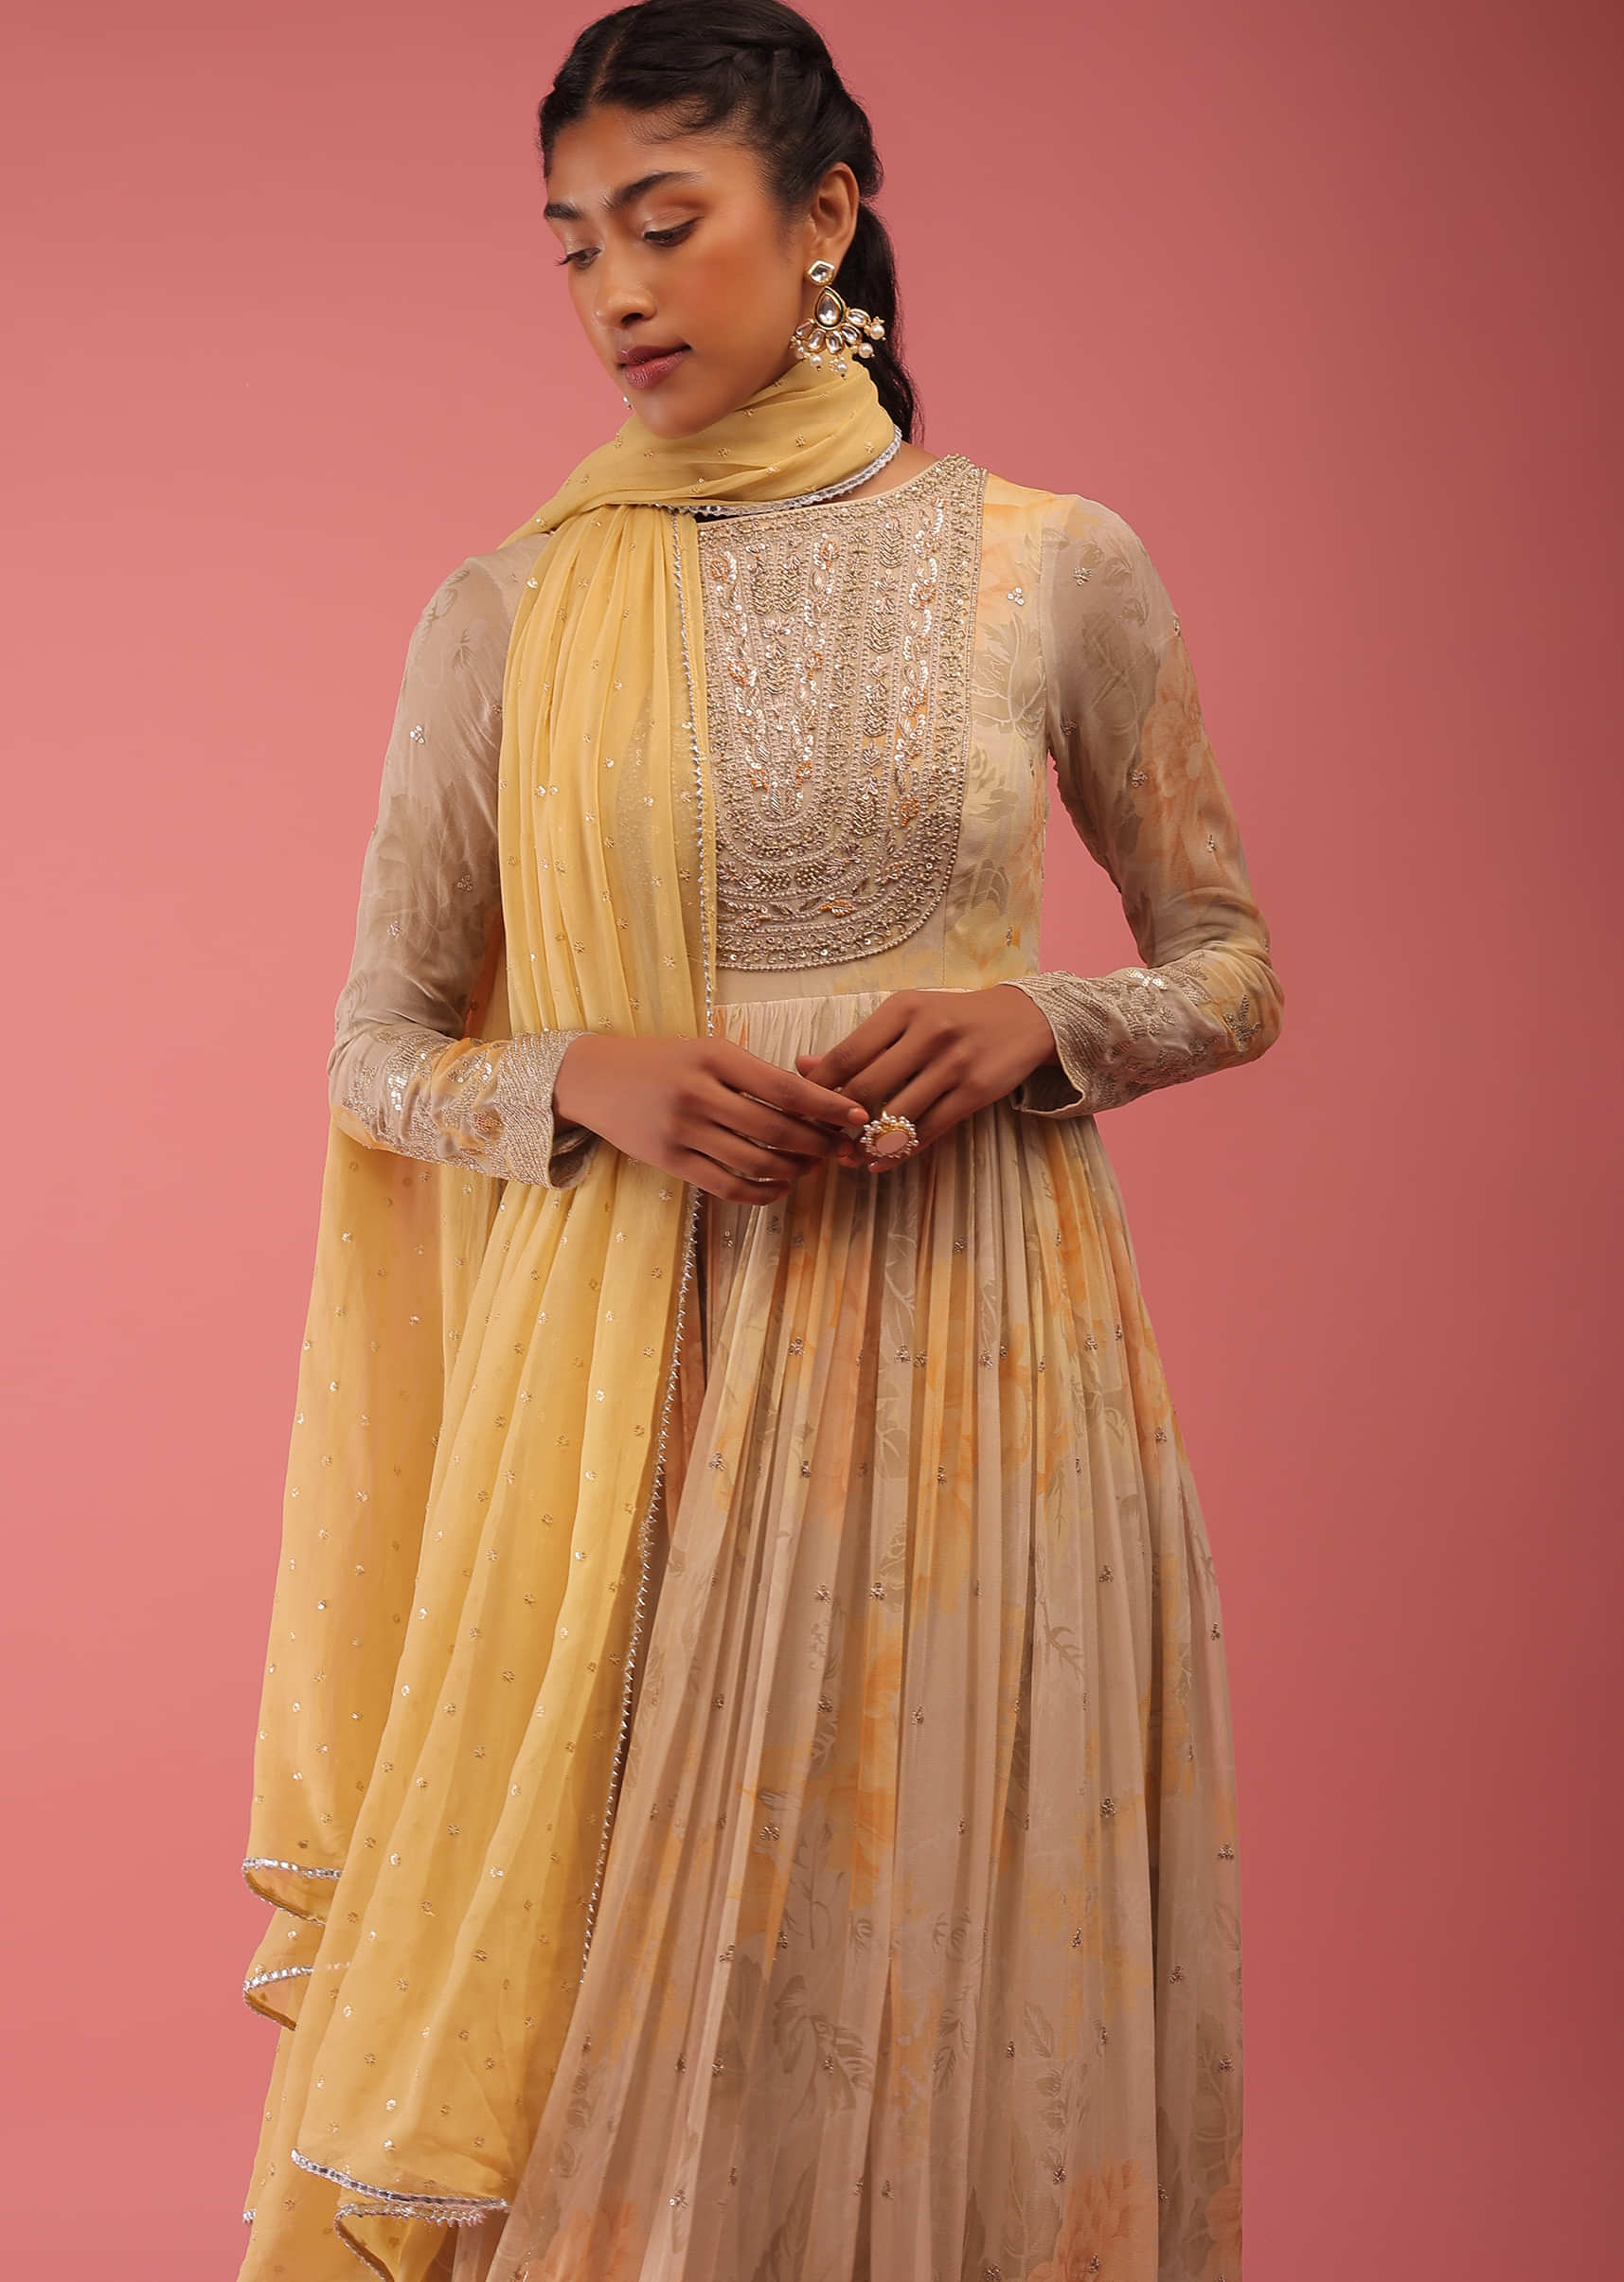 Daffodils Yellow Anarkali Suit In Multi-Color Floral Print With Sequins Embroidery